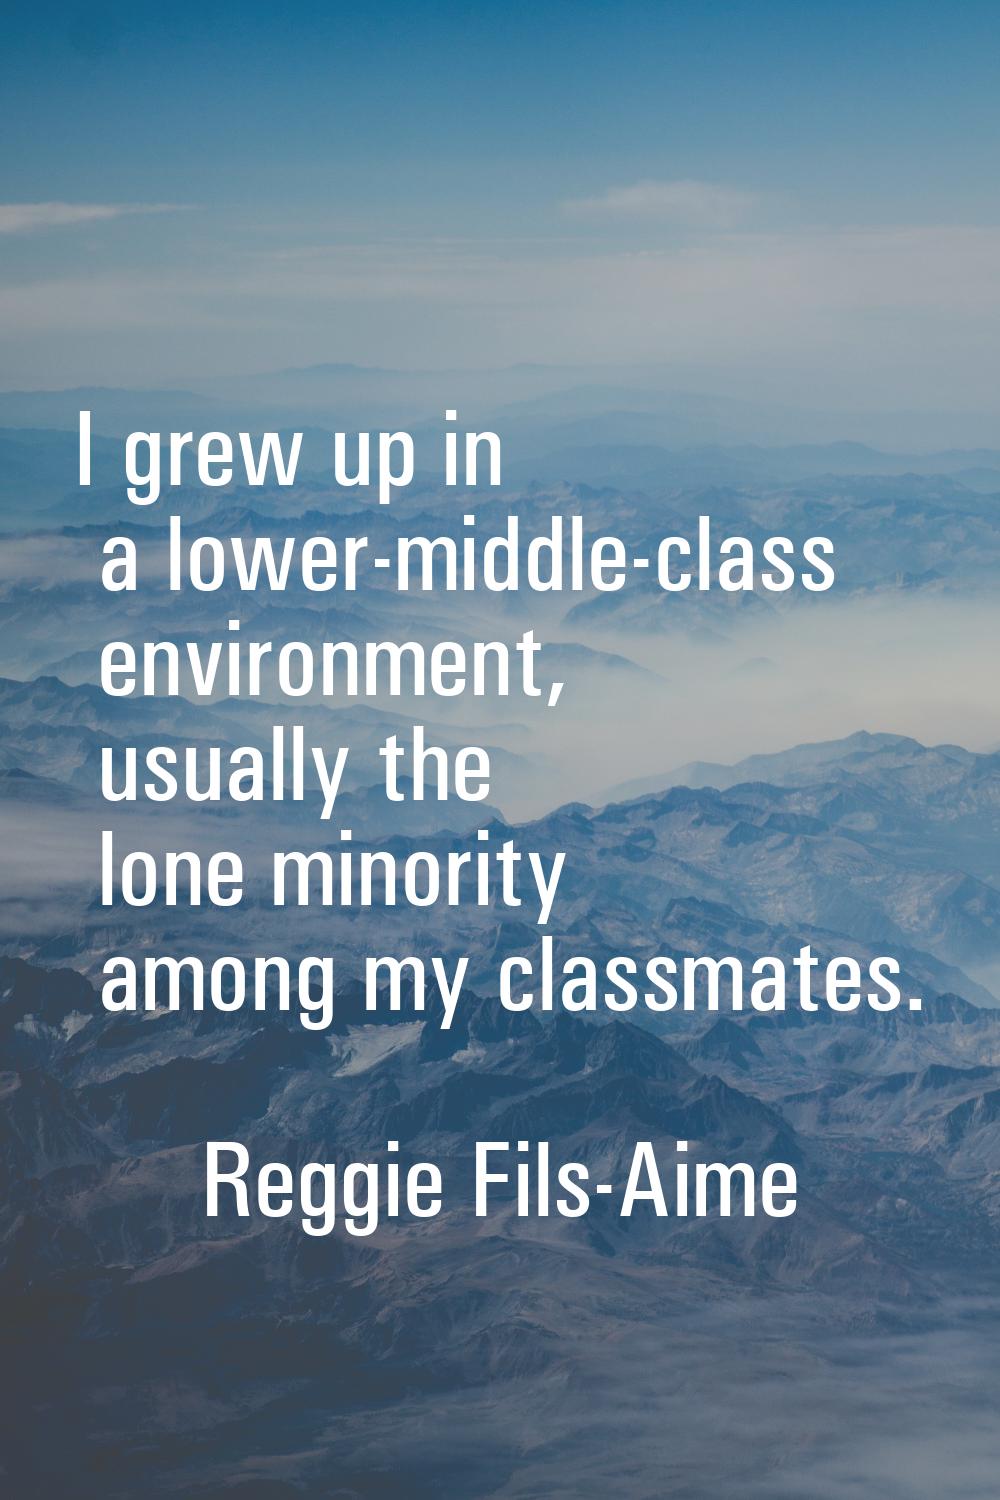 I grew up in a lower-middle-class environment, usually the lone minority among my classmates.